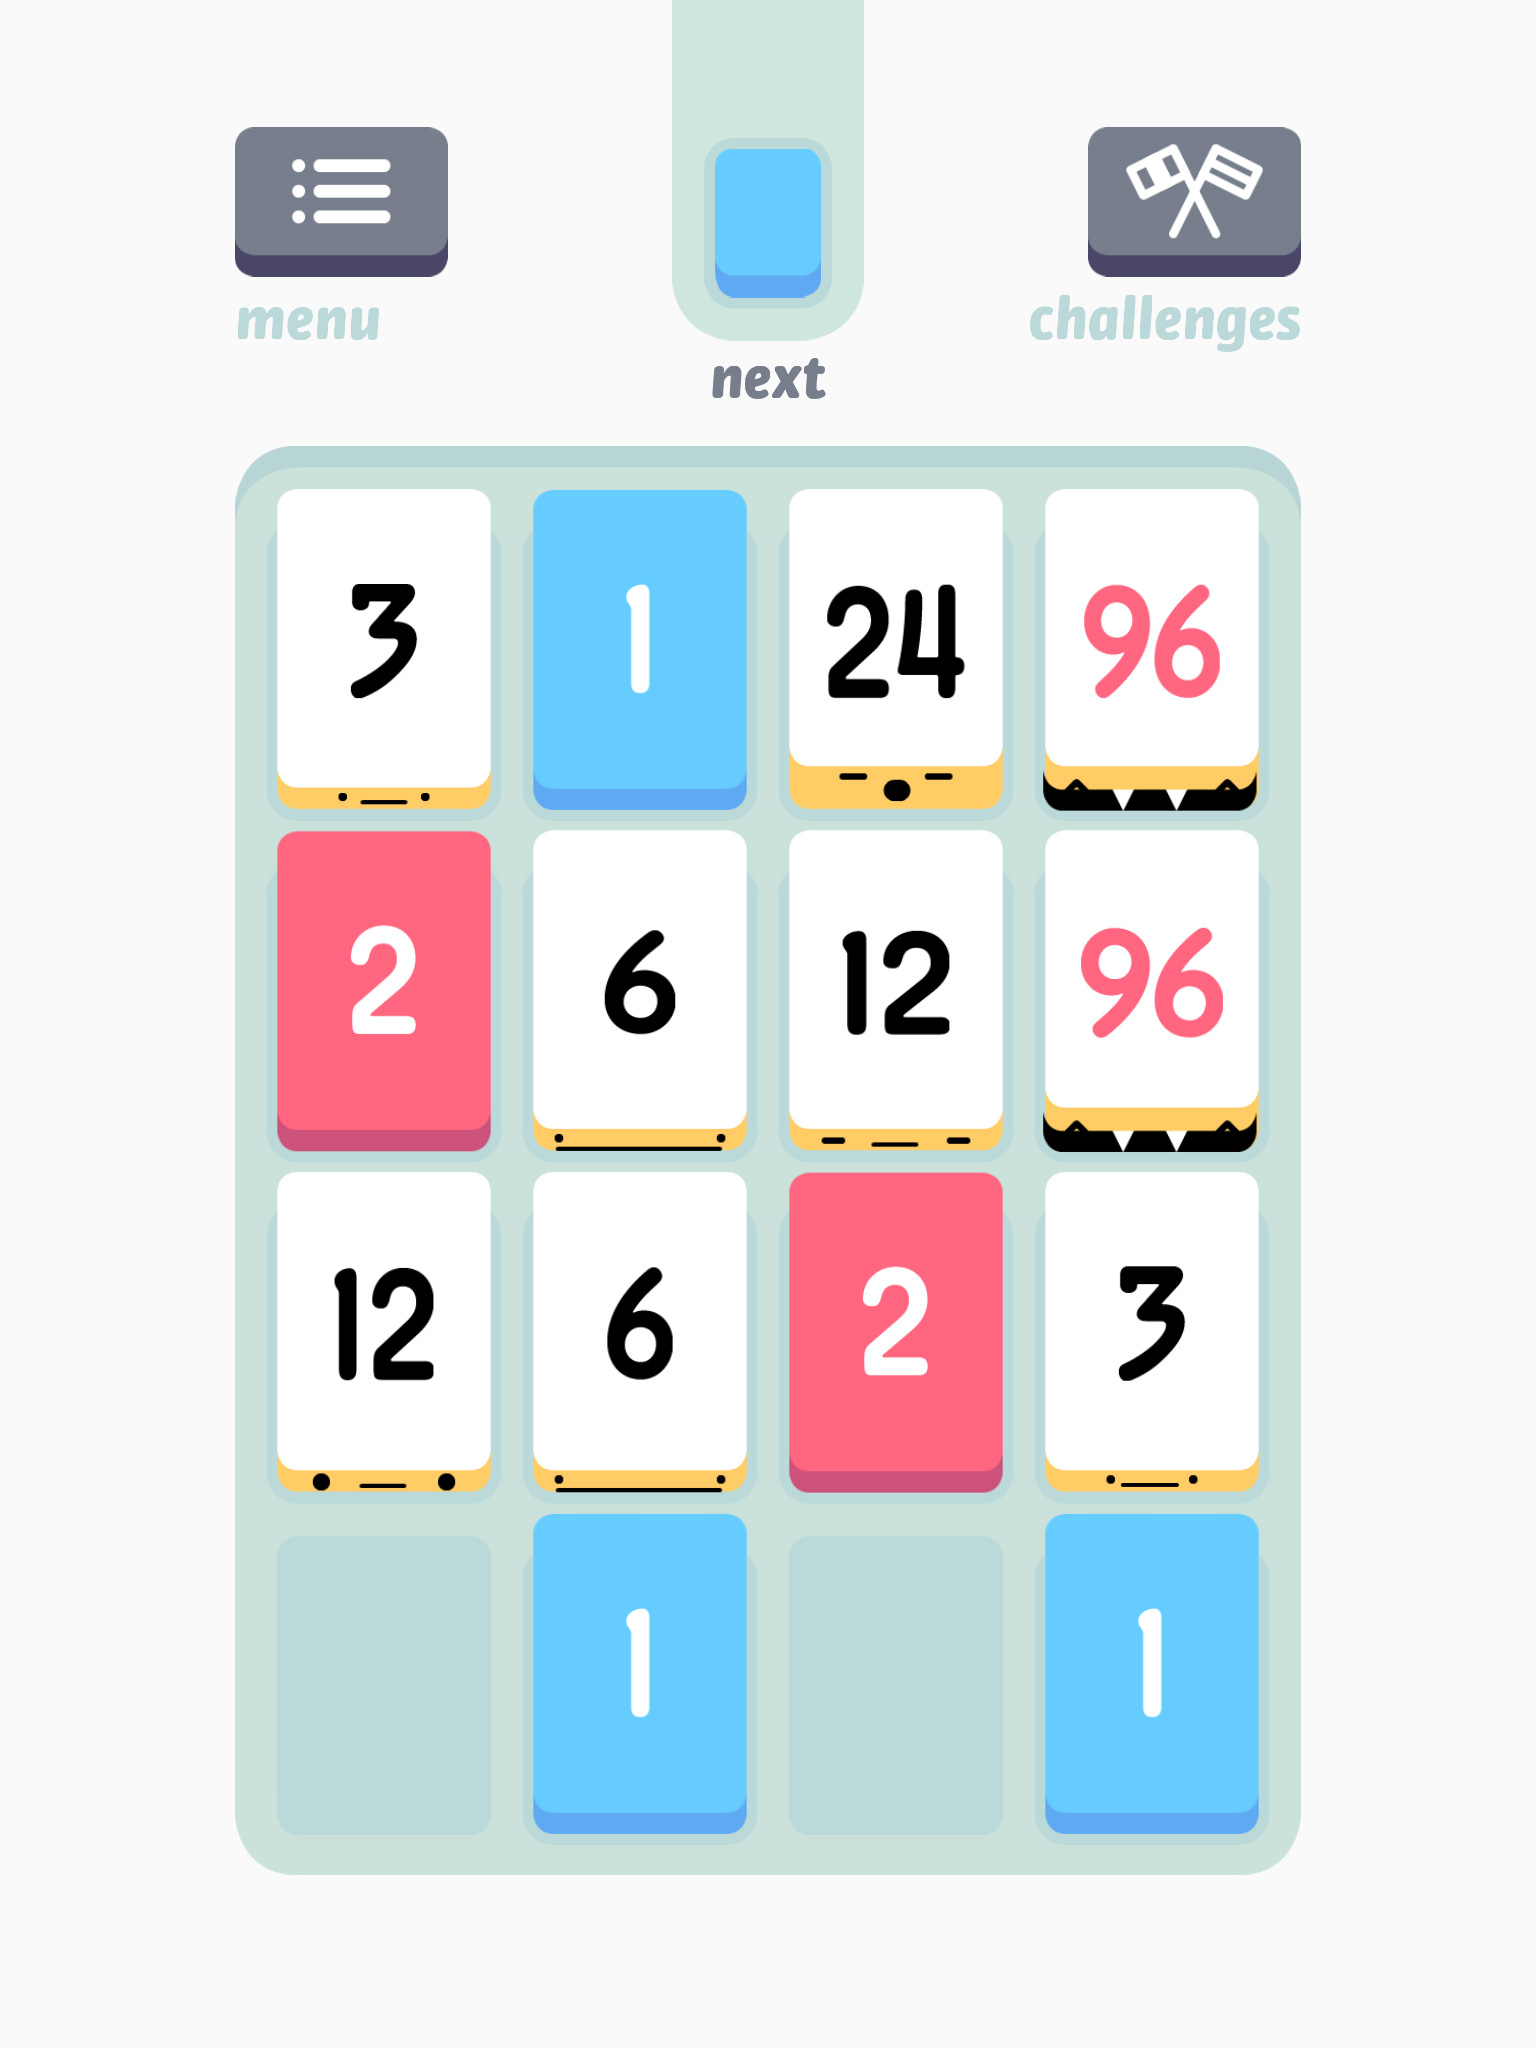 Threes! tips, tricks and hints